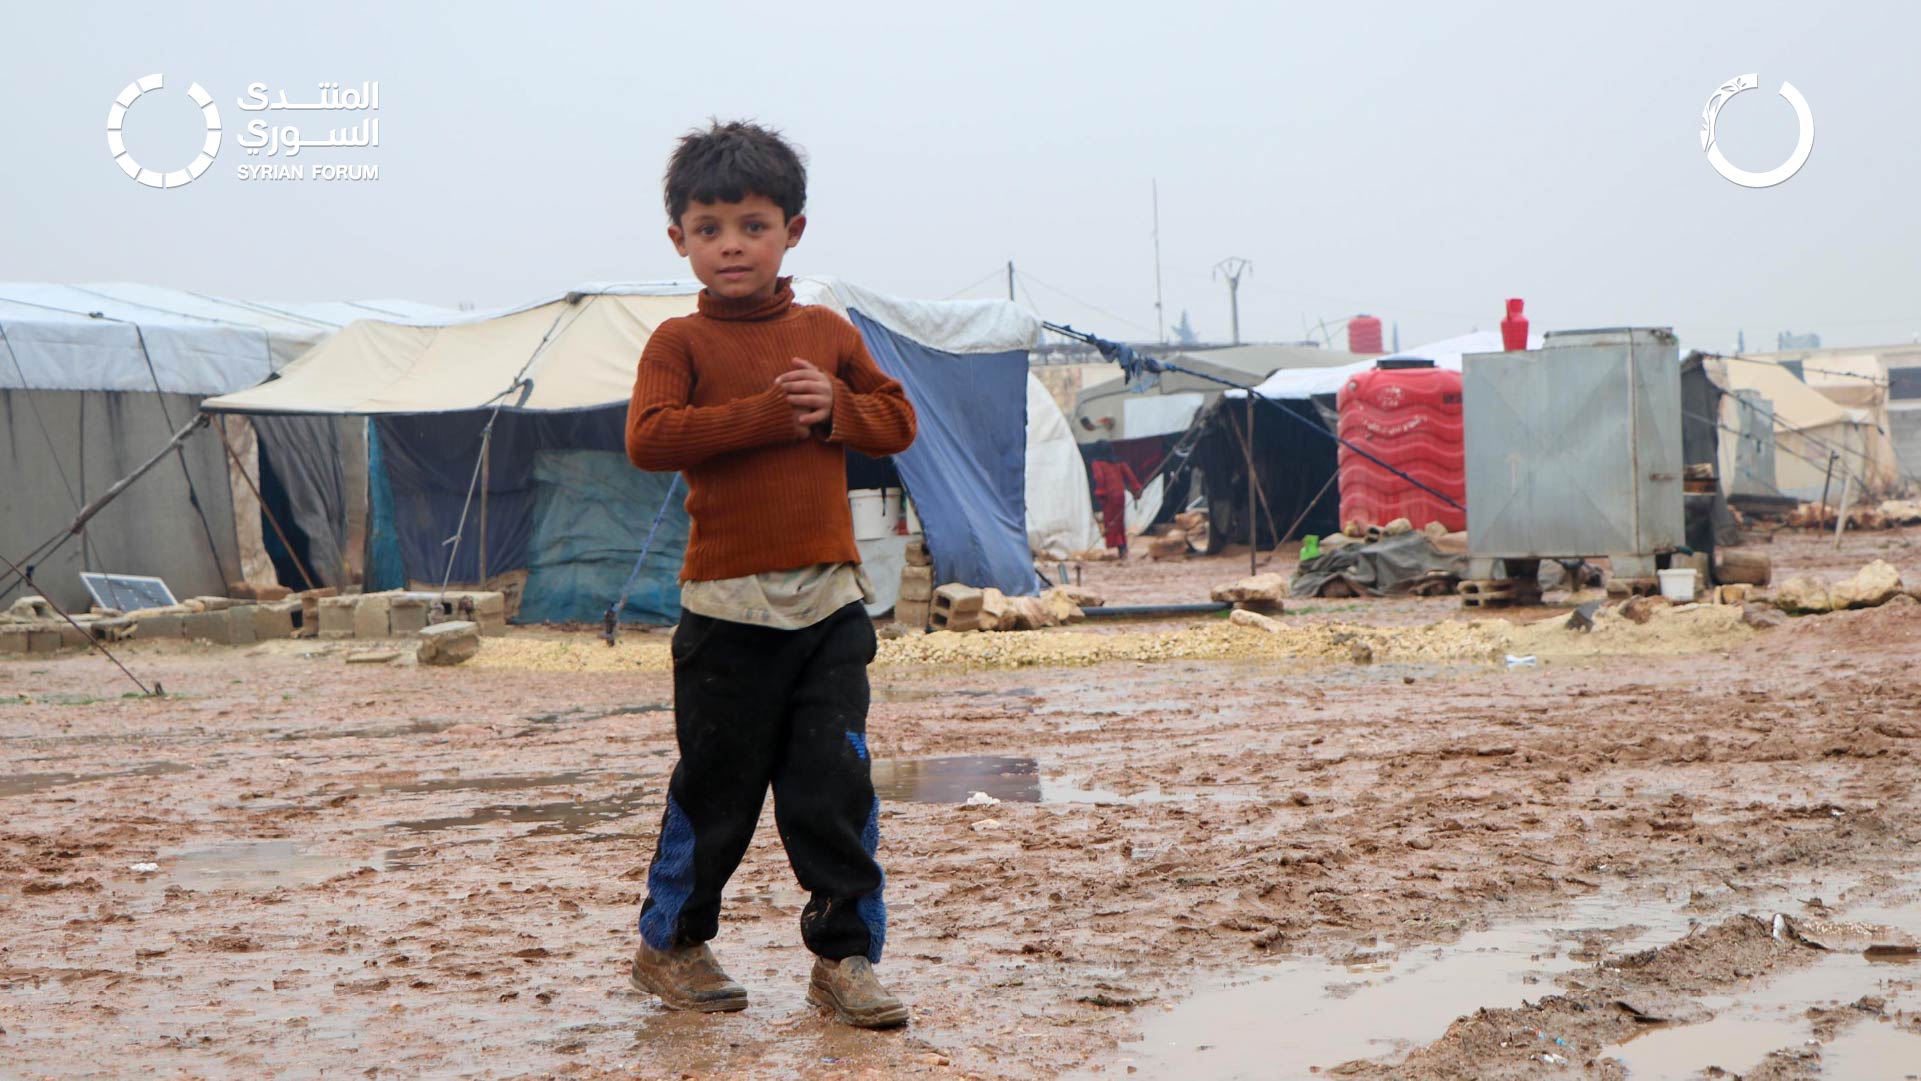 Northern Syria: The Struggle of Displaced People Intensifies with the Arrival of Winter